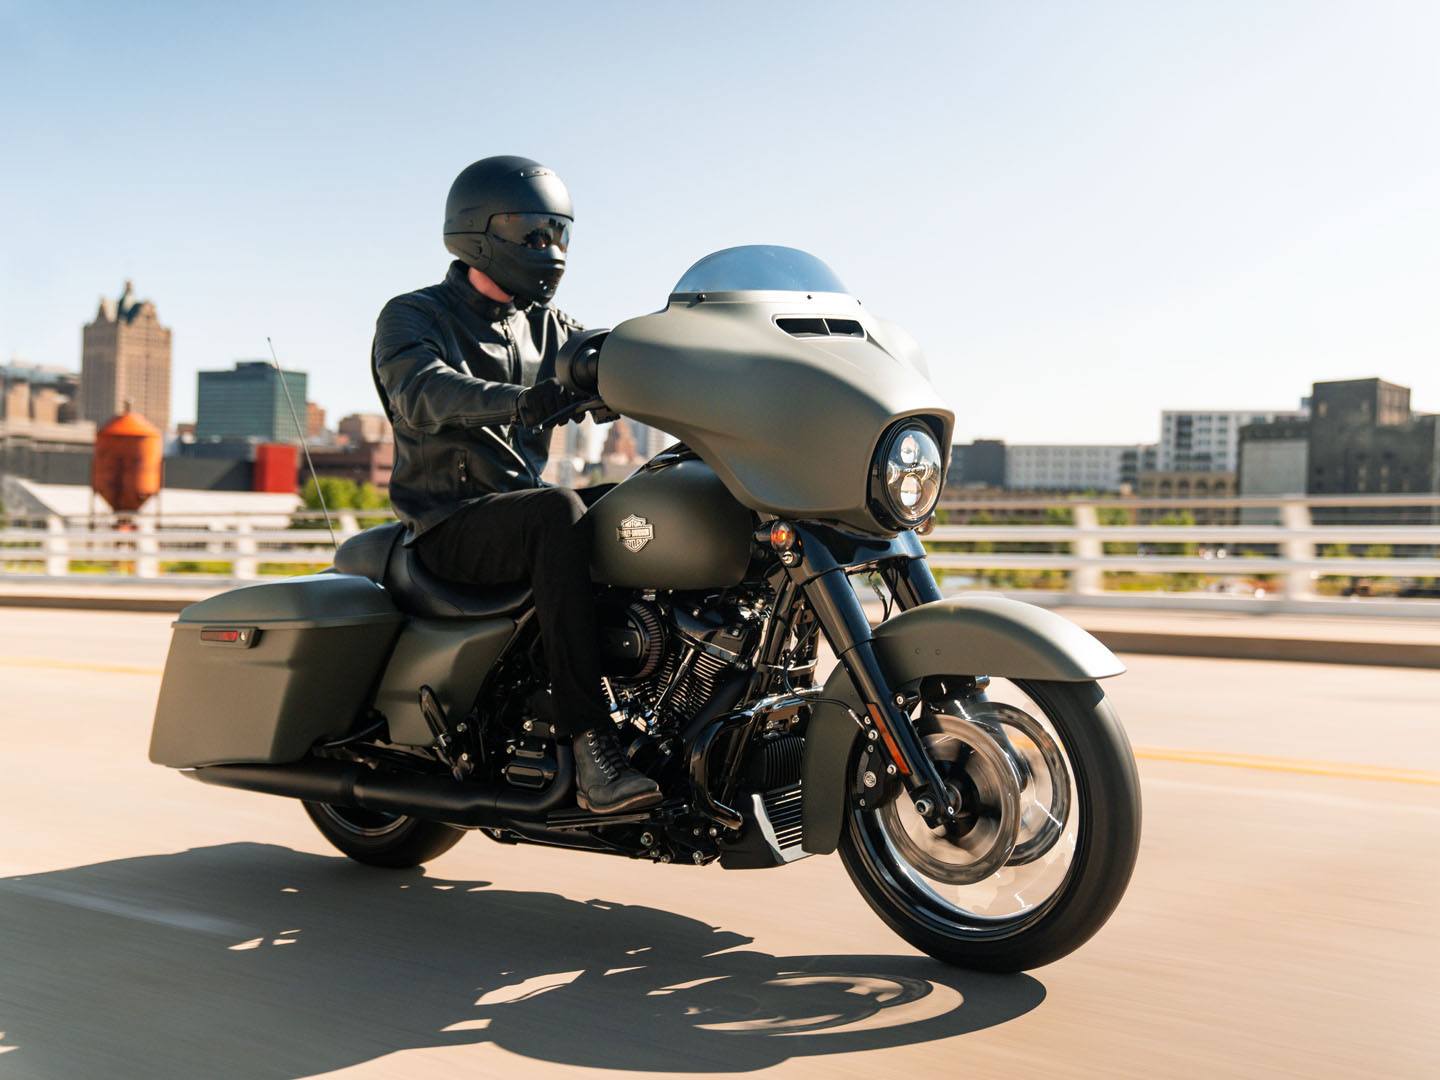 2021 Harley-Davidson Street Glide® Special in New London, Connecticut - Photo 4